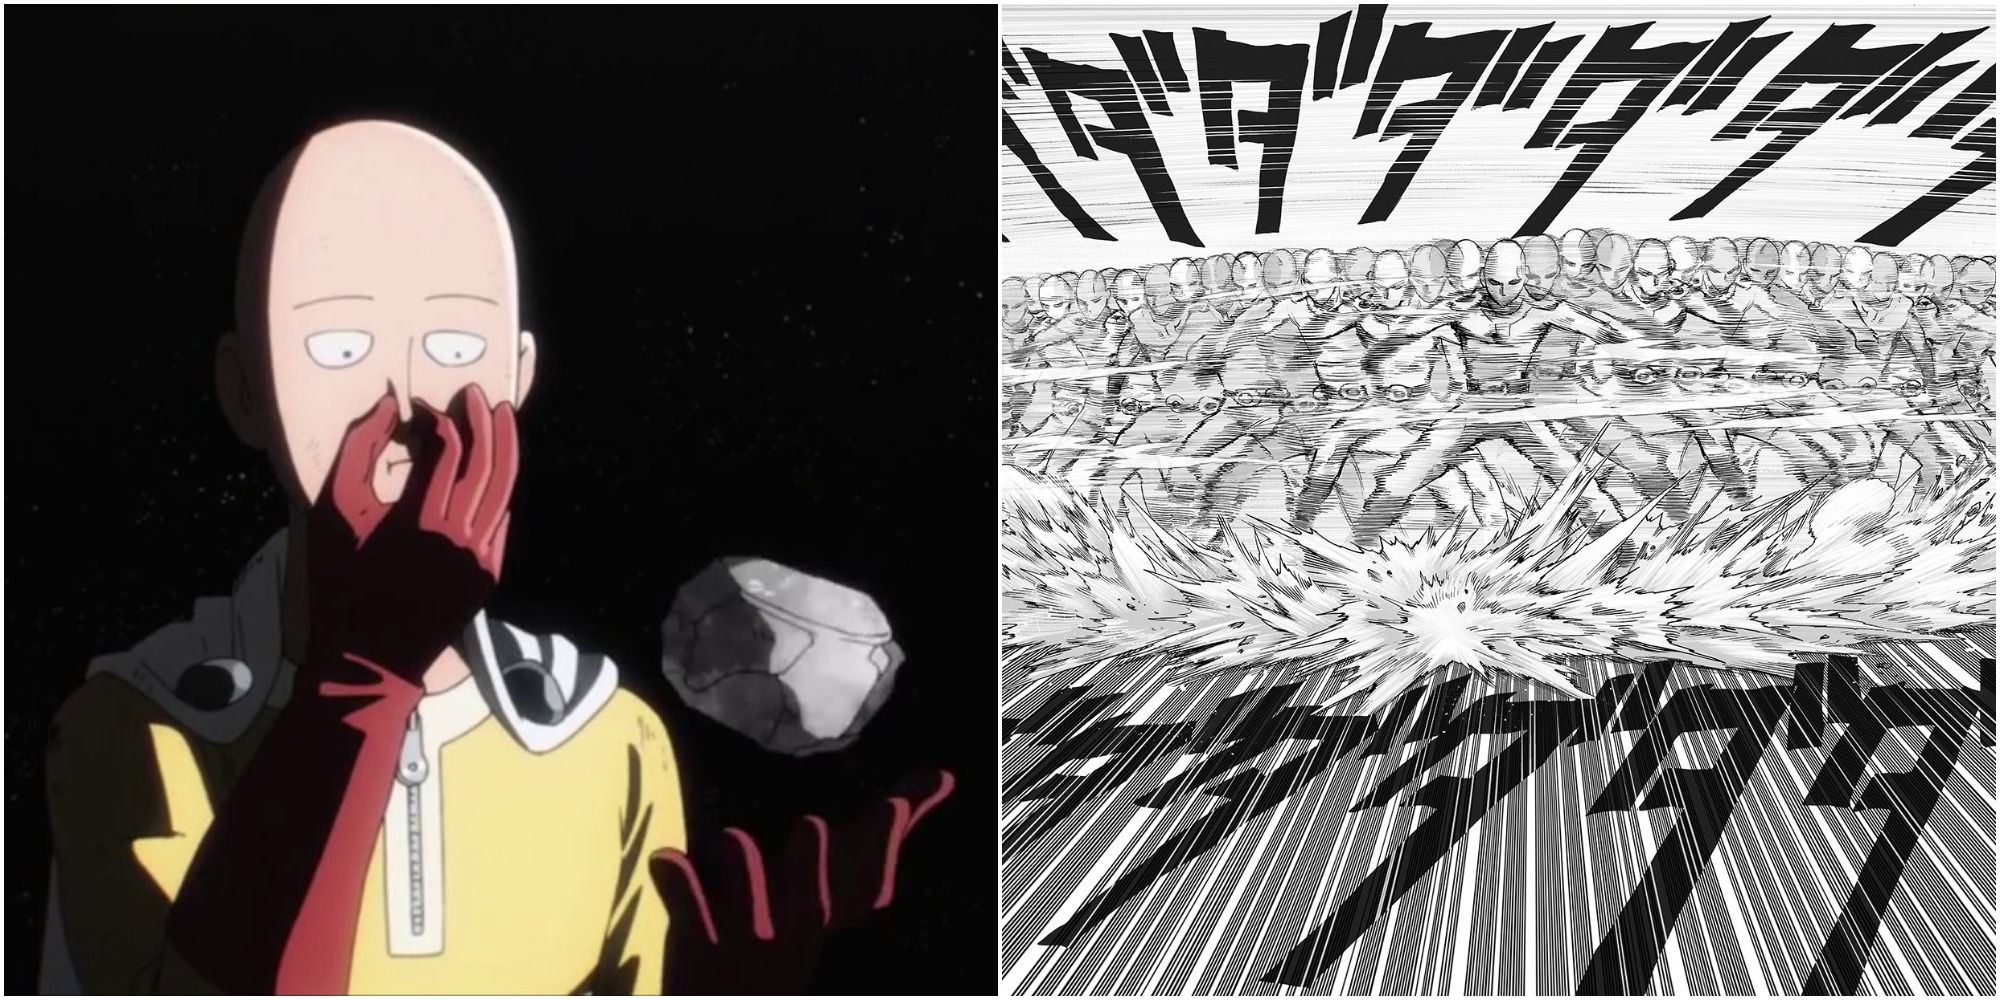 Top 10 Funny Moments from One Punch Man 